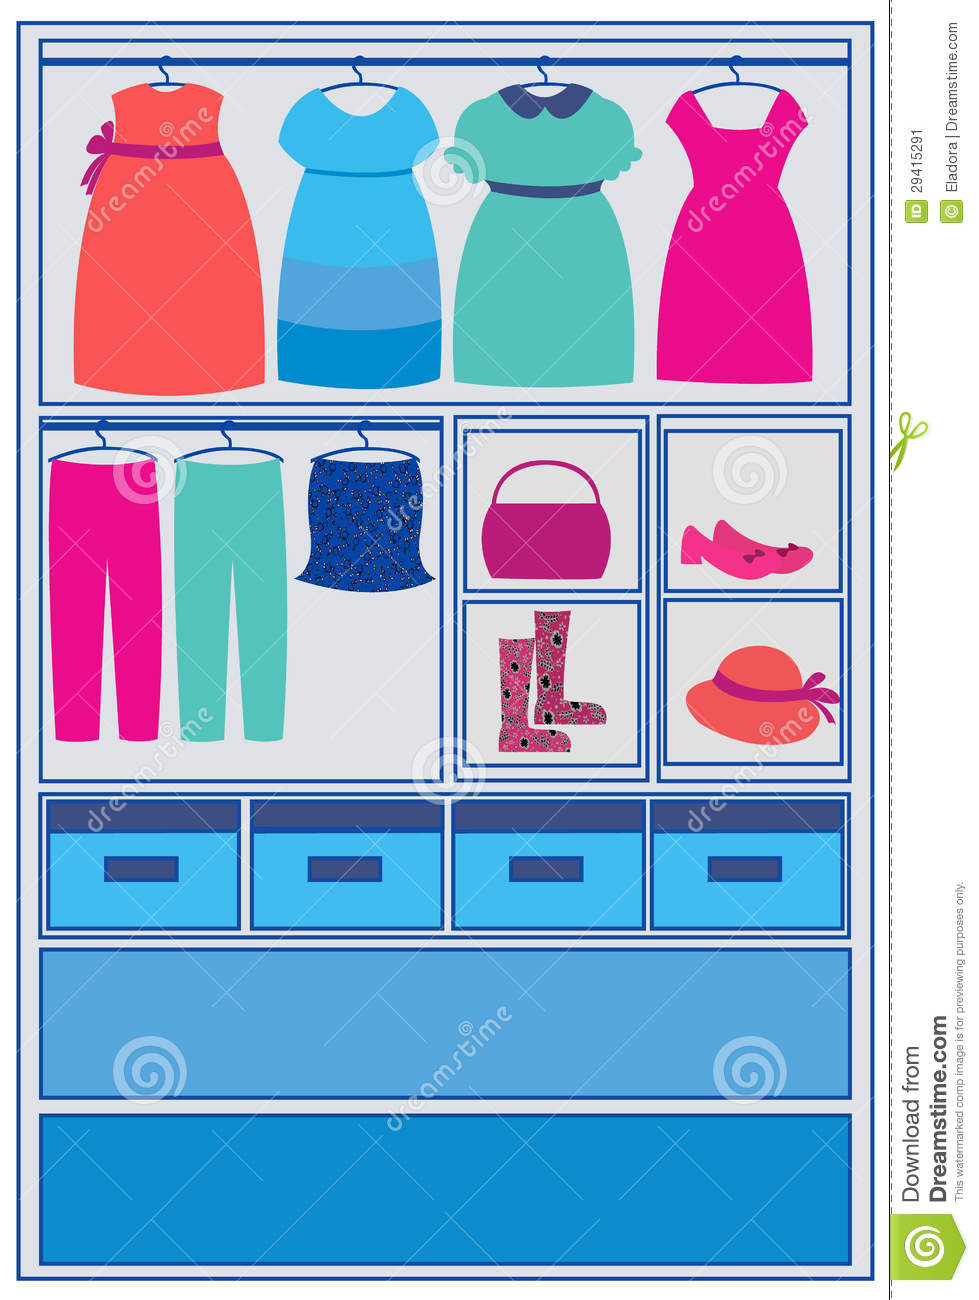 Clothes Closet Clipart Image Search Results